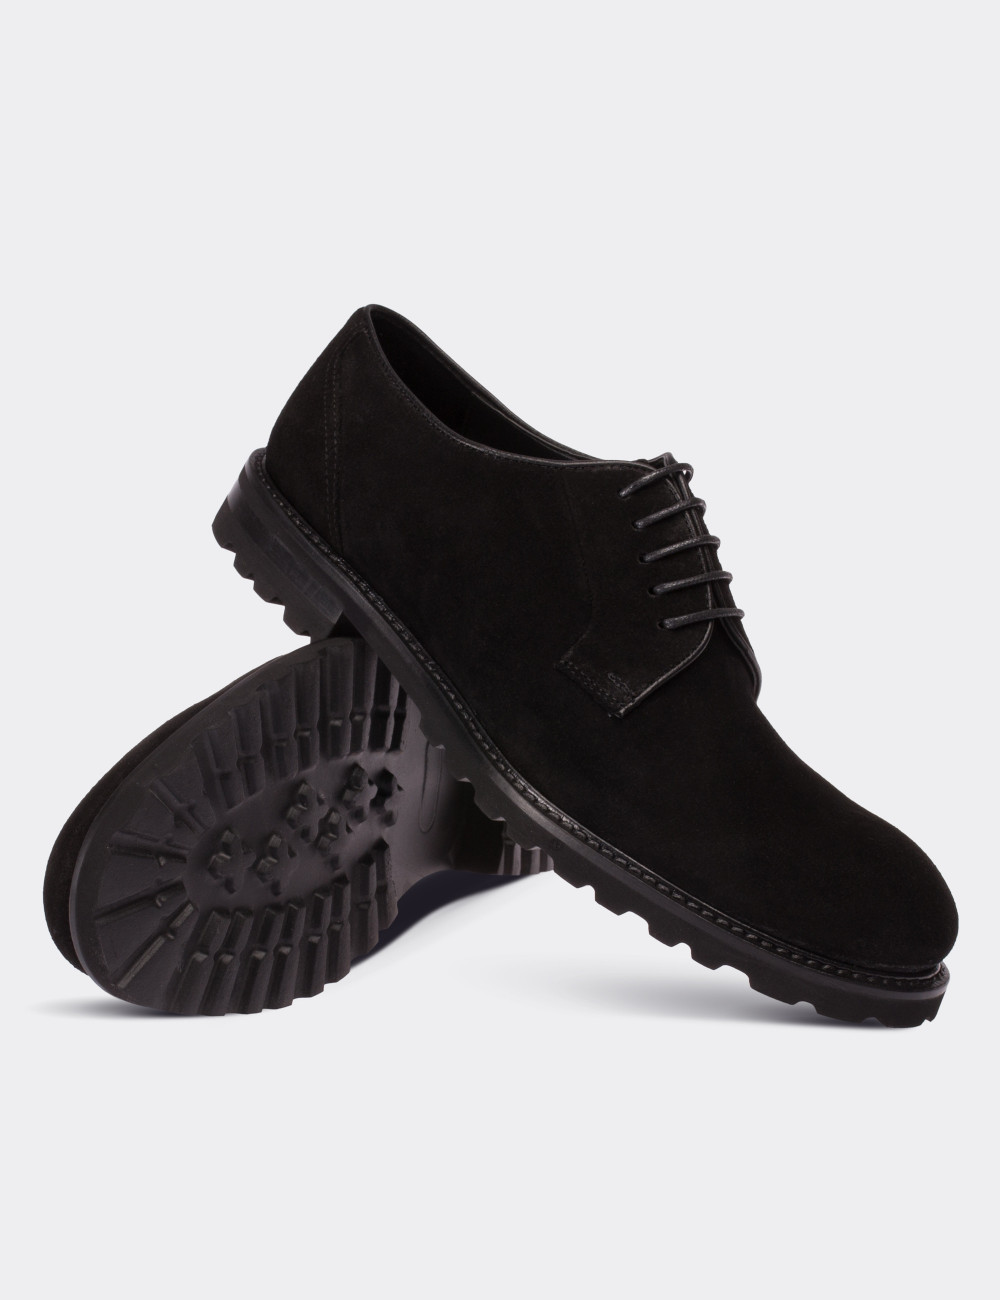 Black Suede Leather Lace-up Shoes - 01090MSYHE01